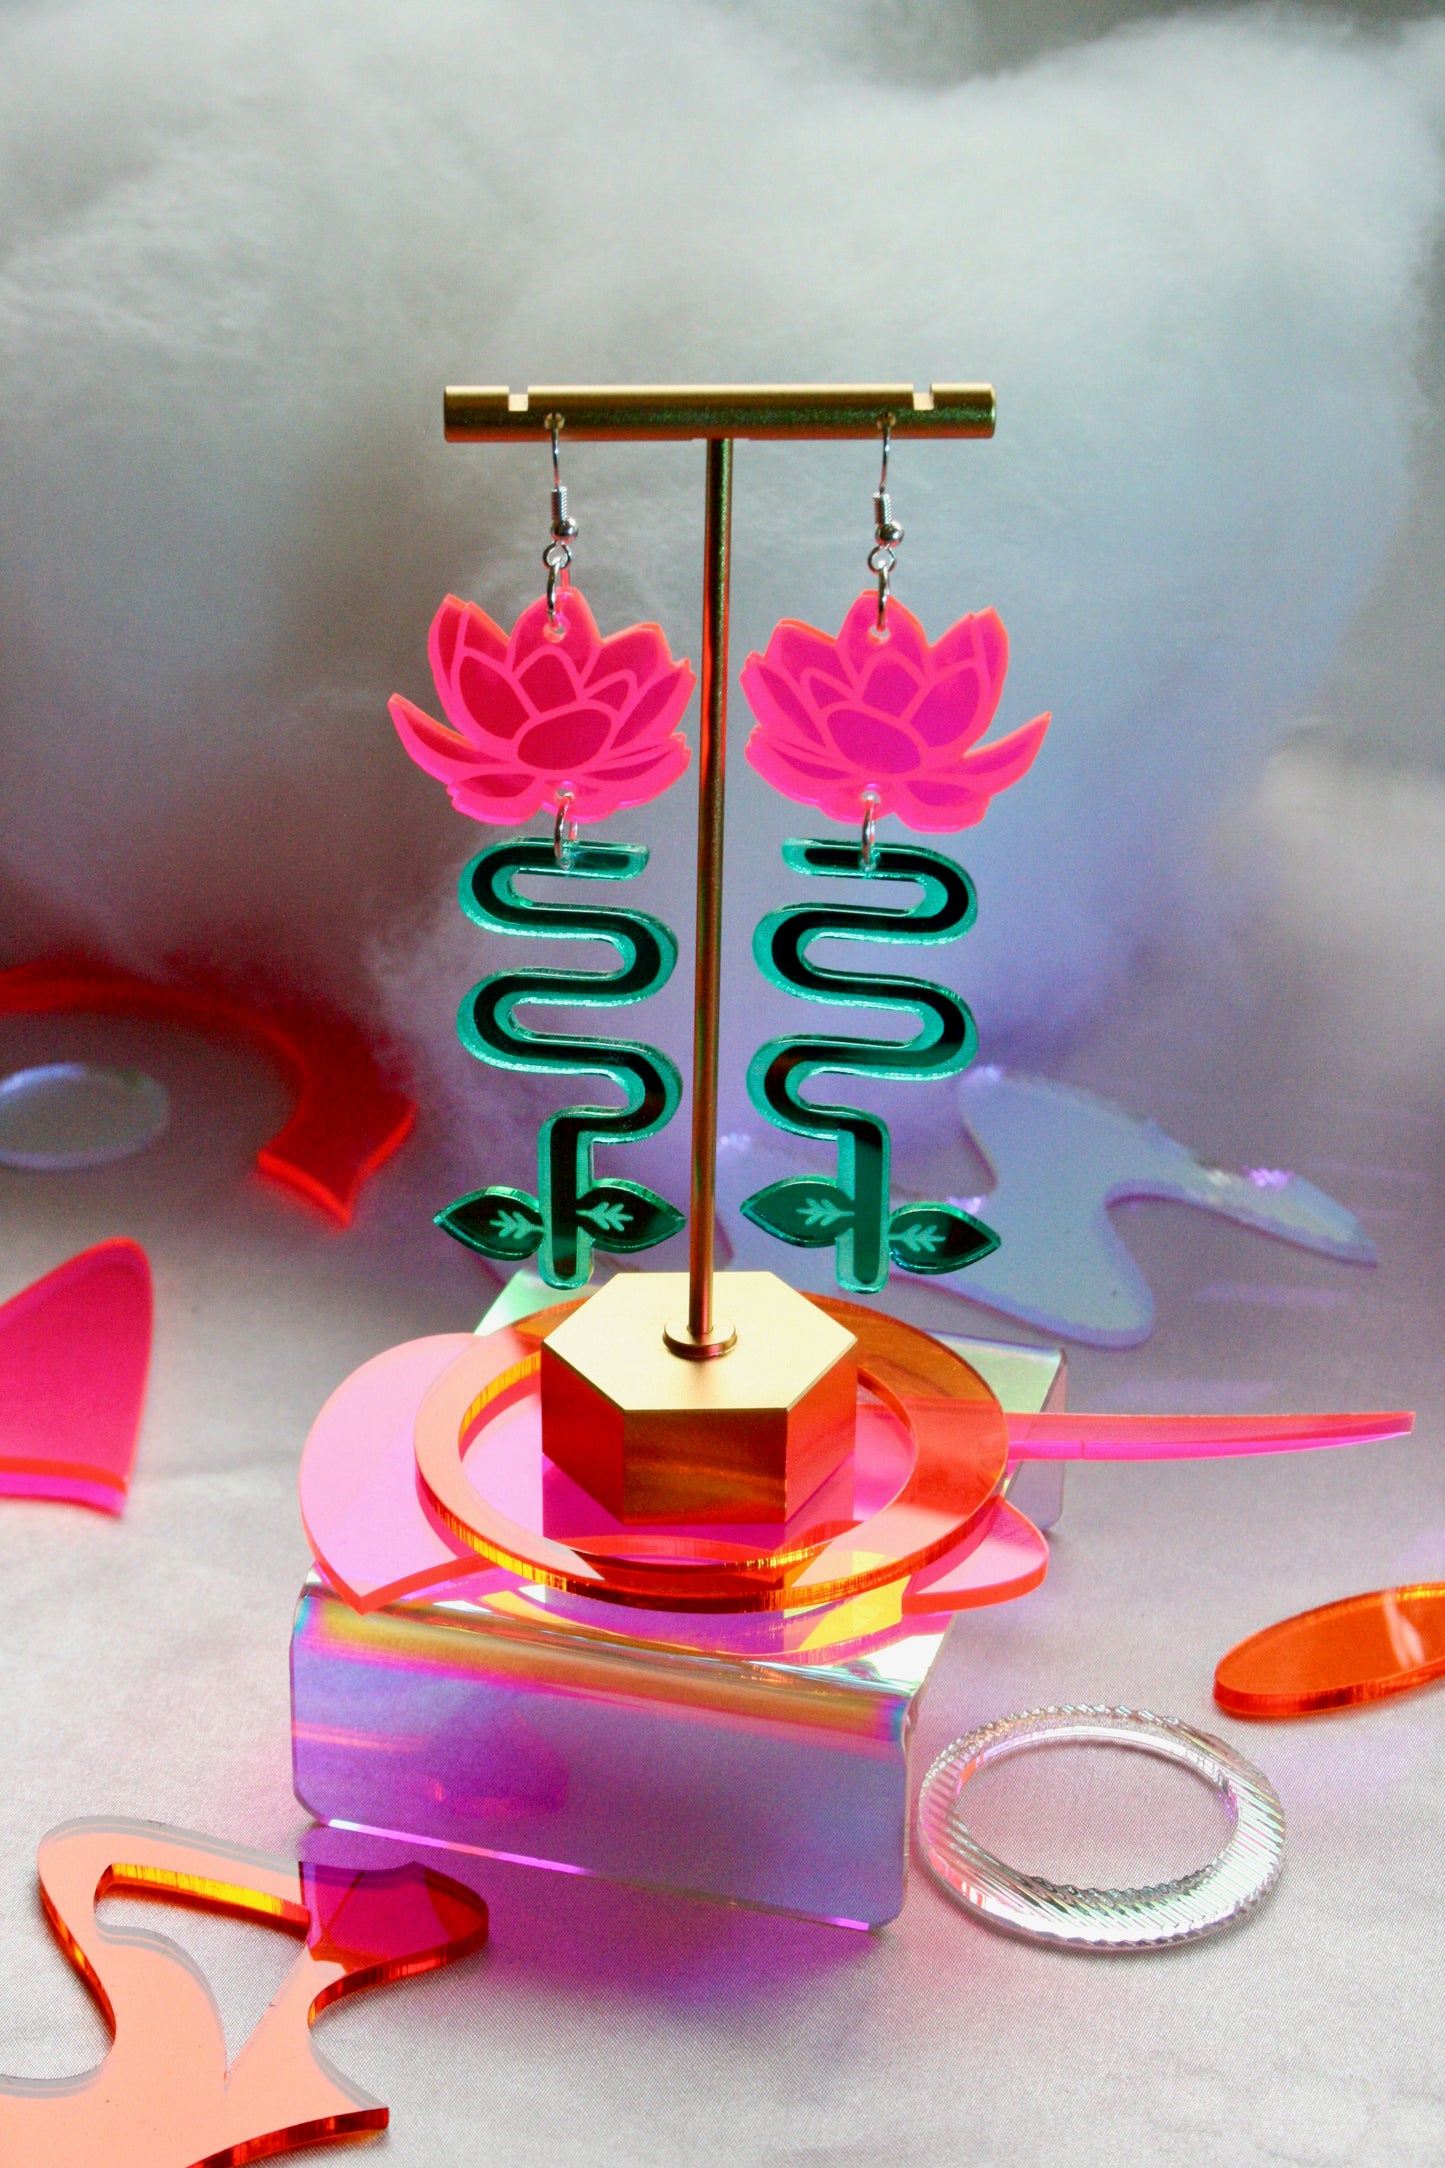 Lotus Blossom Earrings- Sparkly Green Red Pink Reflective Lightweight Neon Statement